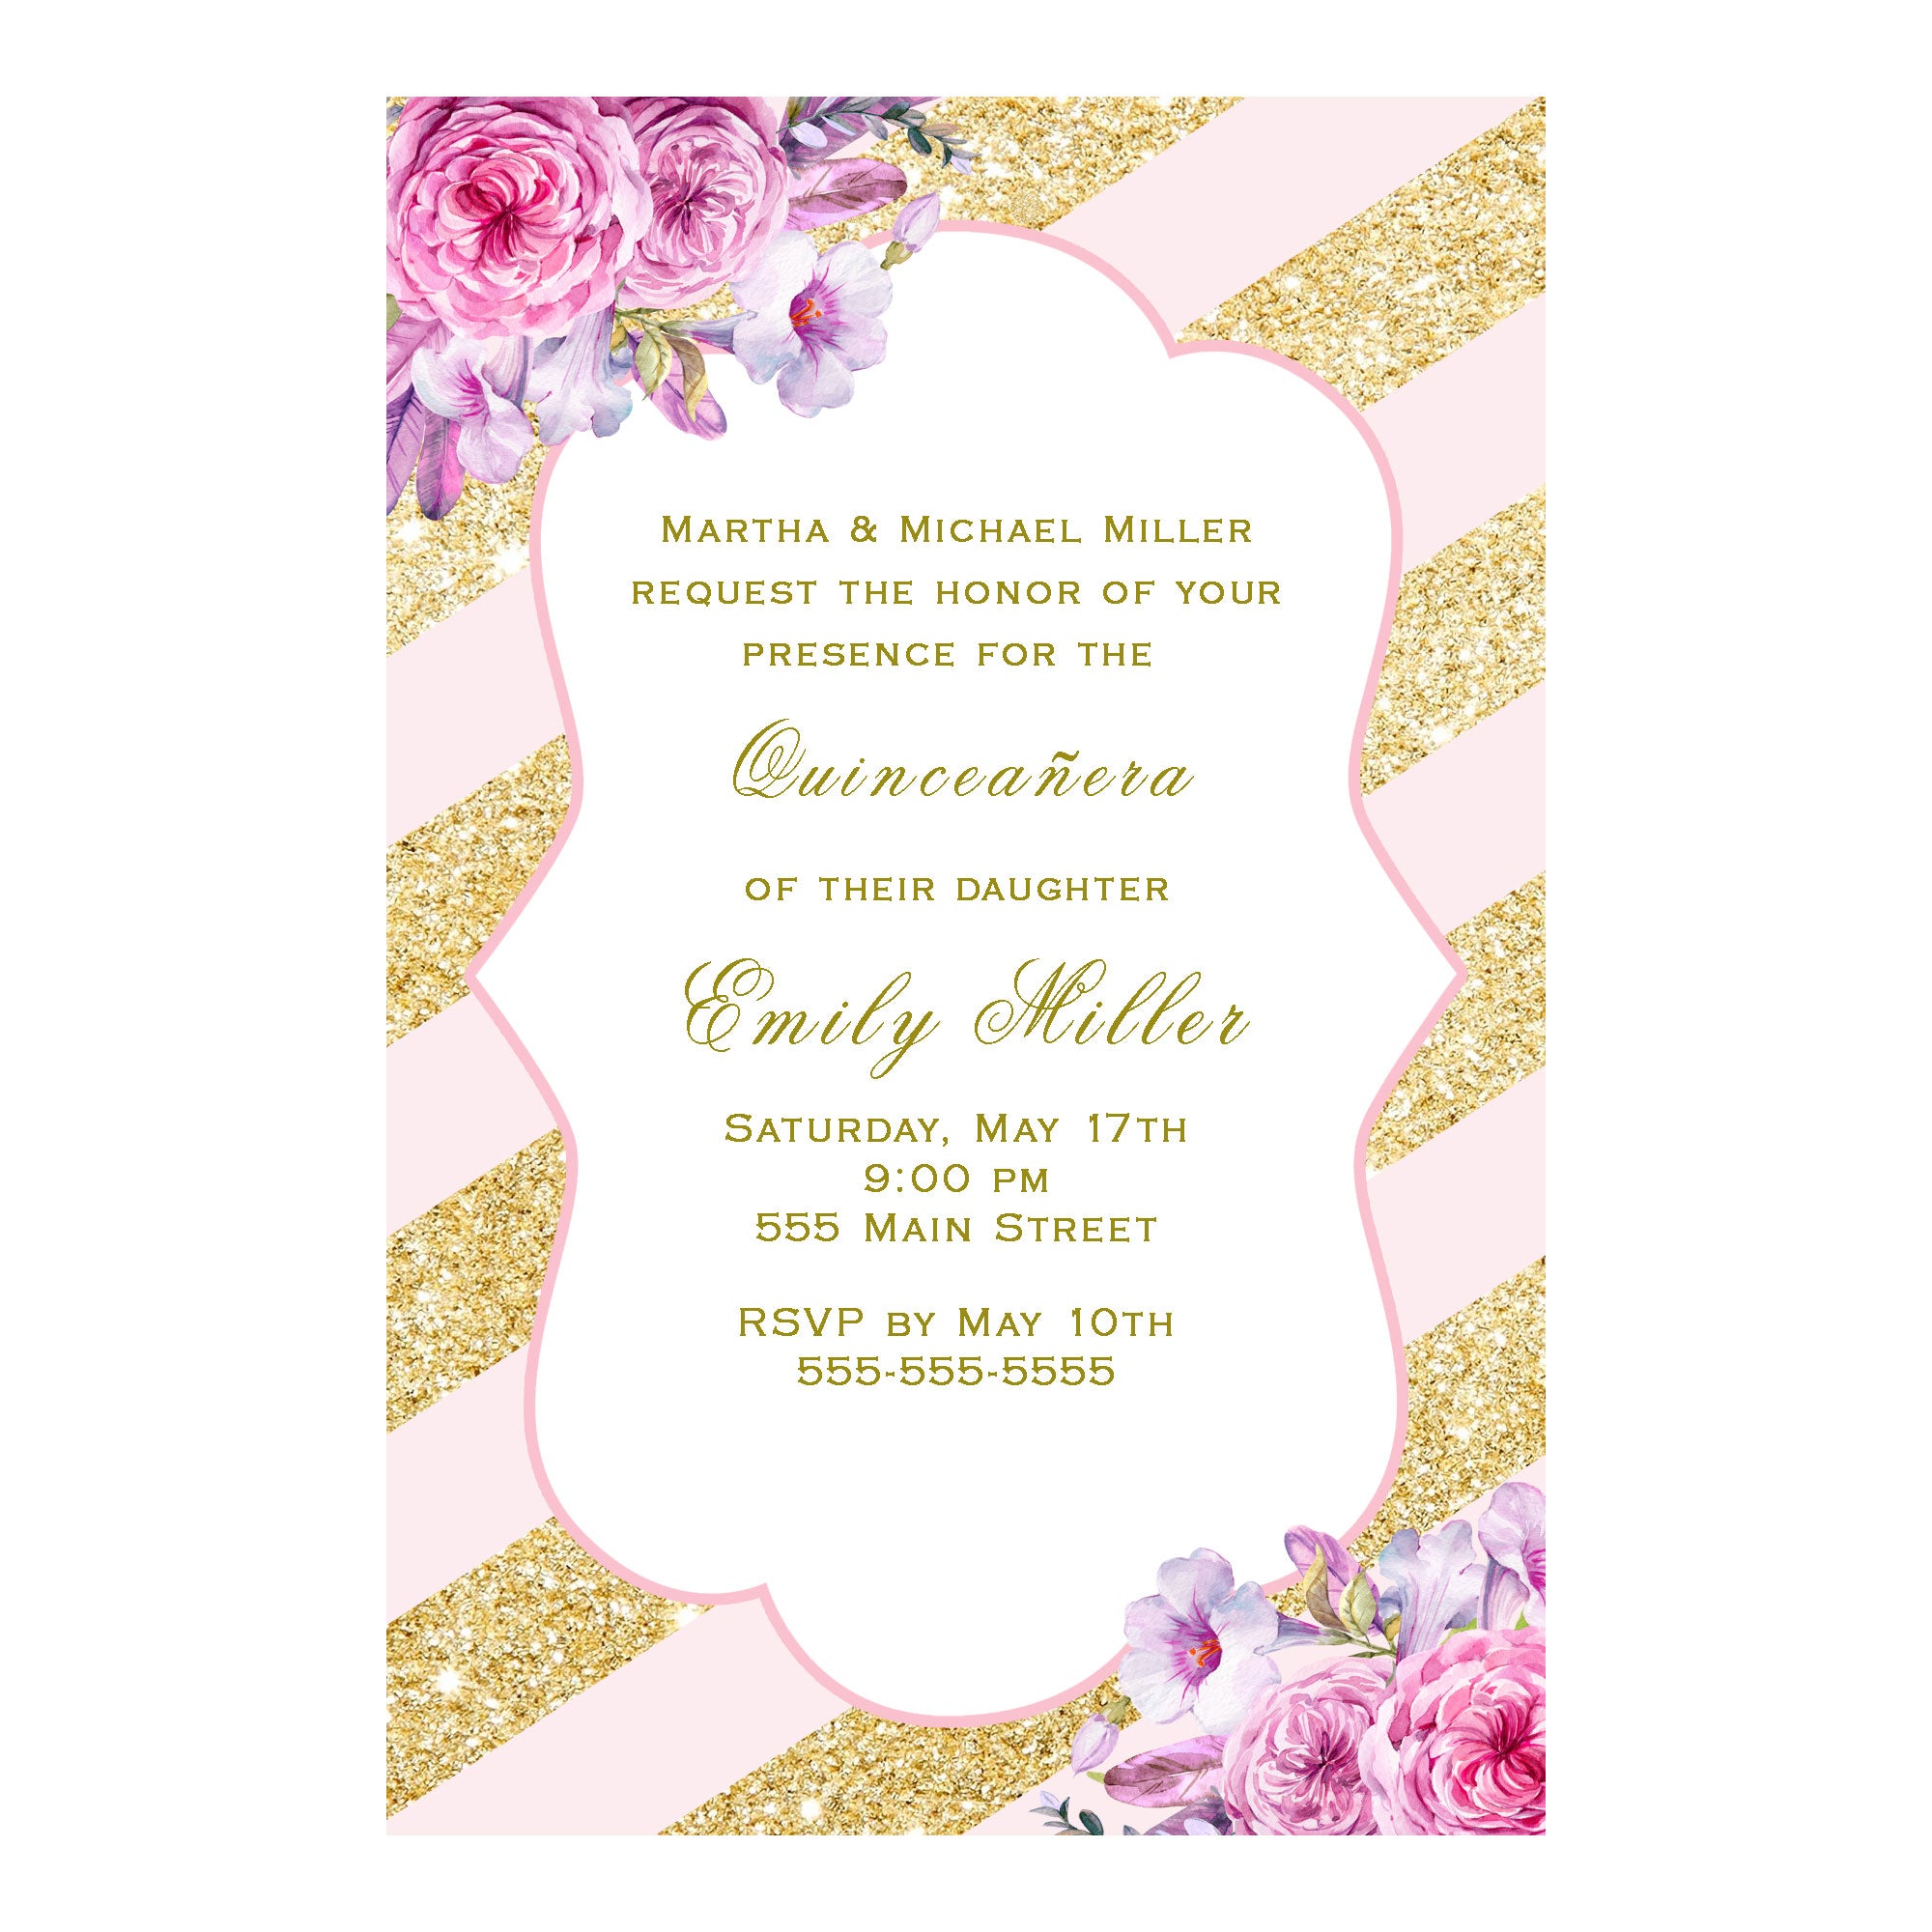 Sweet 16 quinceanera invitations pink gold floral printable